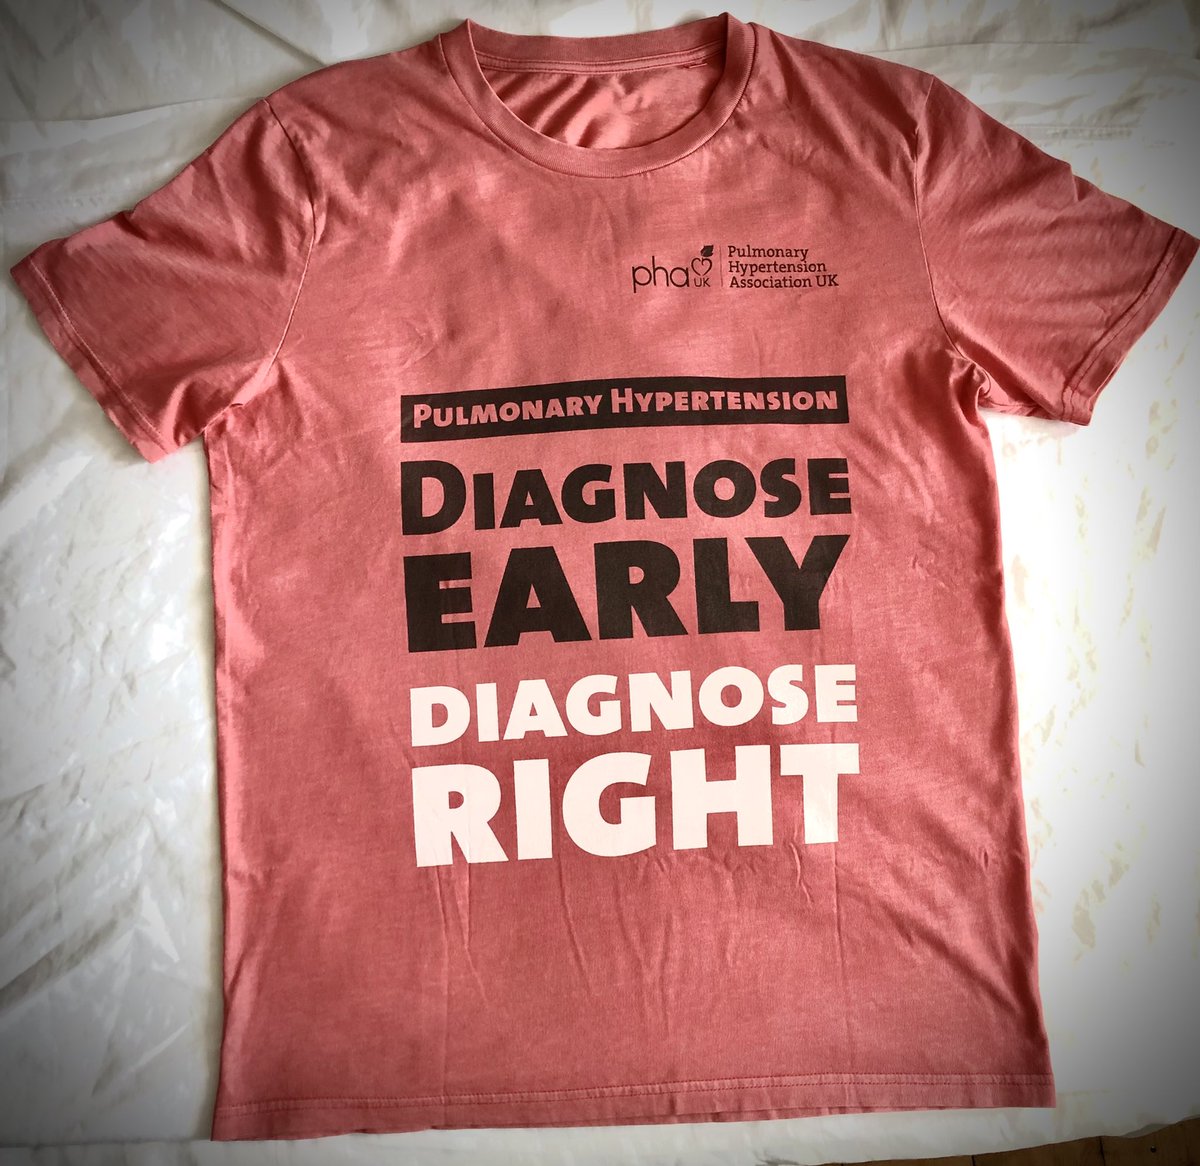 Thank you to @PHA_UK for your support - the eye-catching T-shirt has arrived! “Pulmonary Hypertension: Diagnose early, diagnose right” #pulmonaryhypertension #awarenessraising #hiking #campaign #health